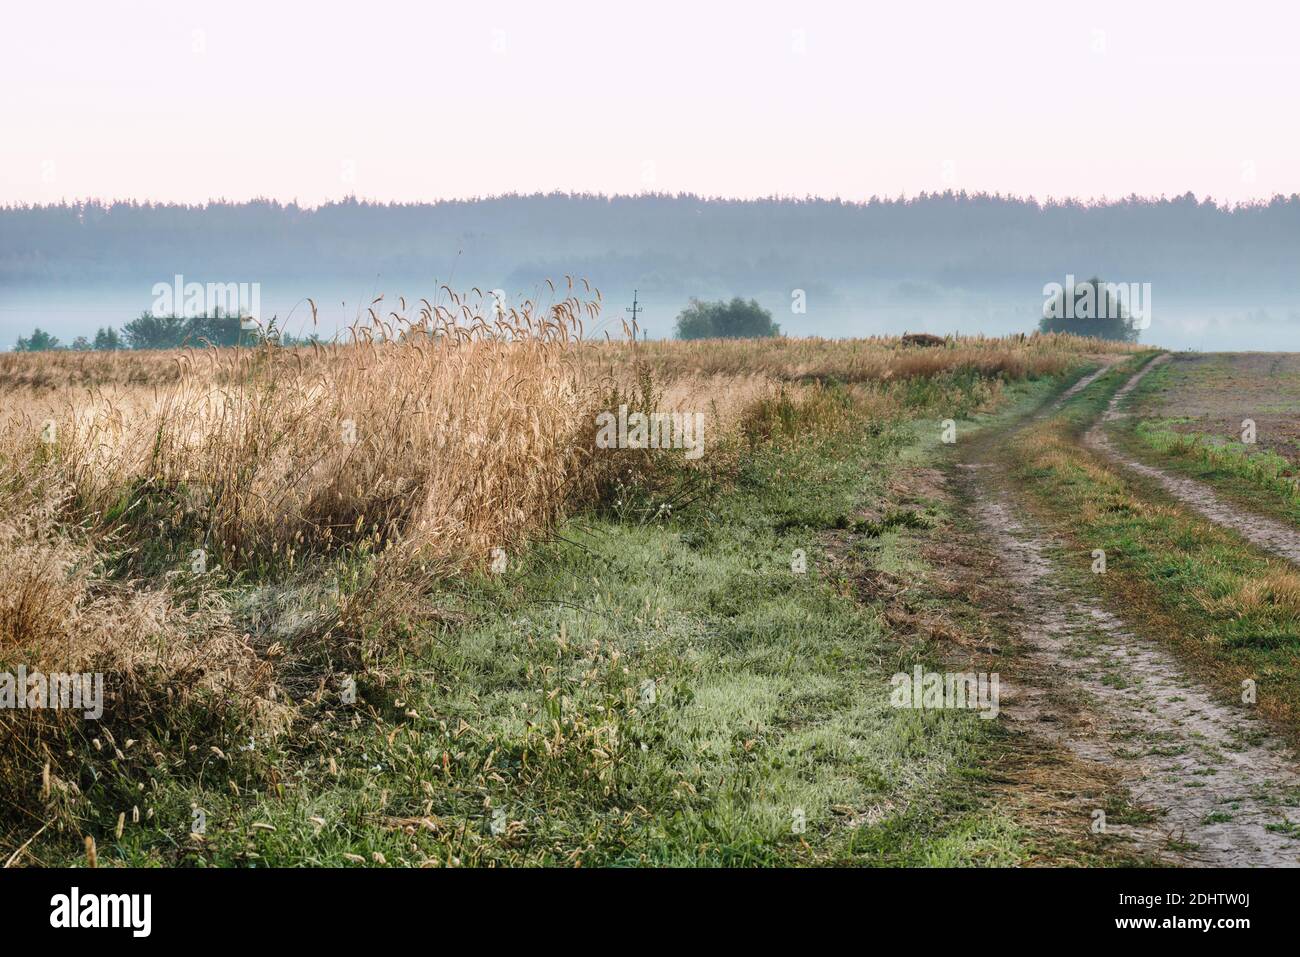 A beautiful path, spikelets of wheat and dawn in an autumn field. Stock Photo